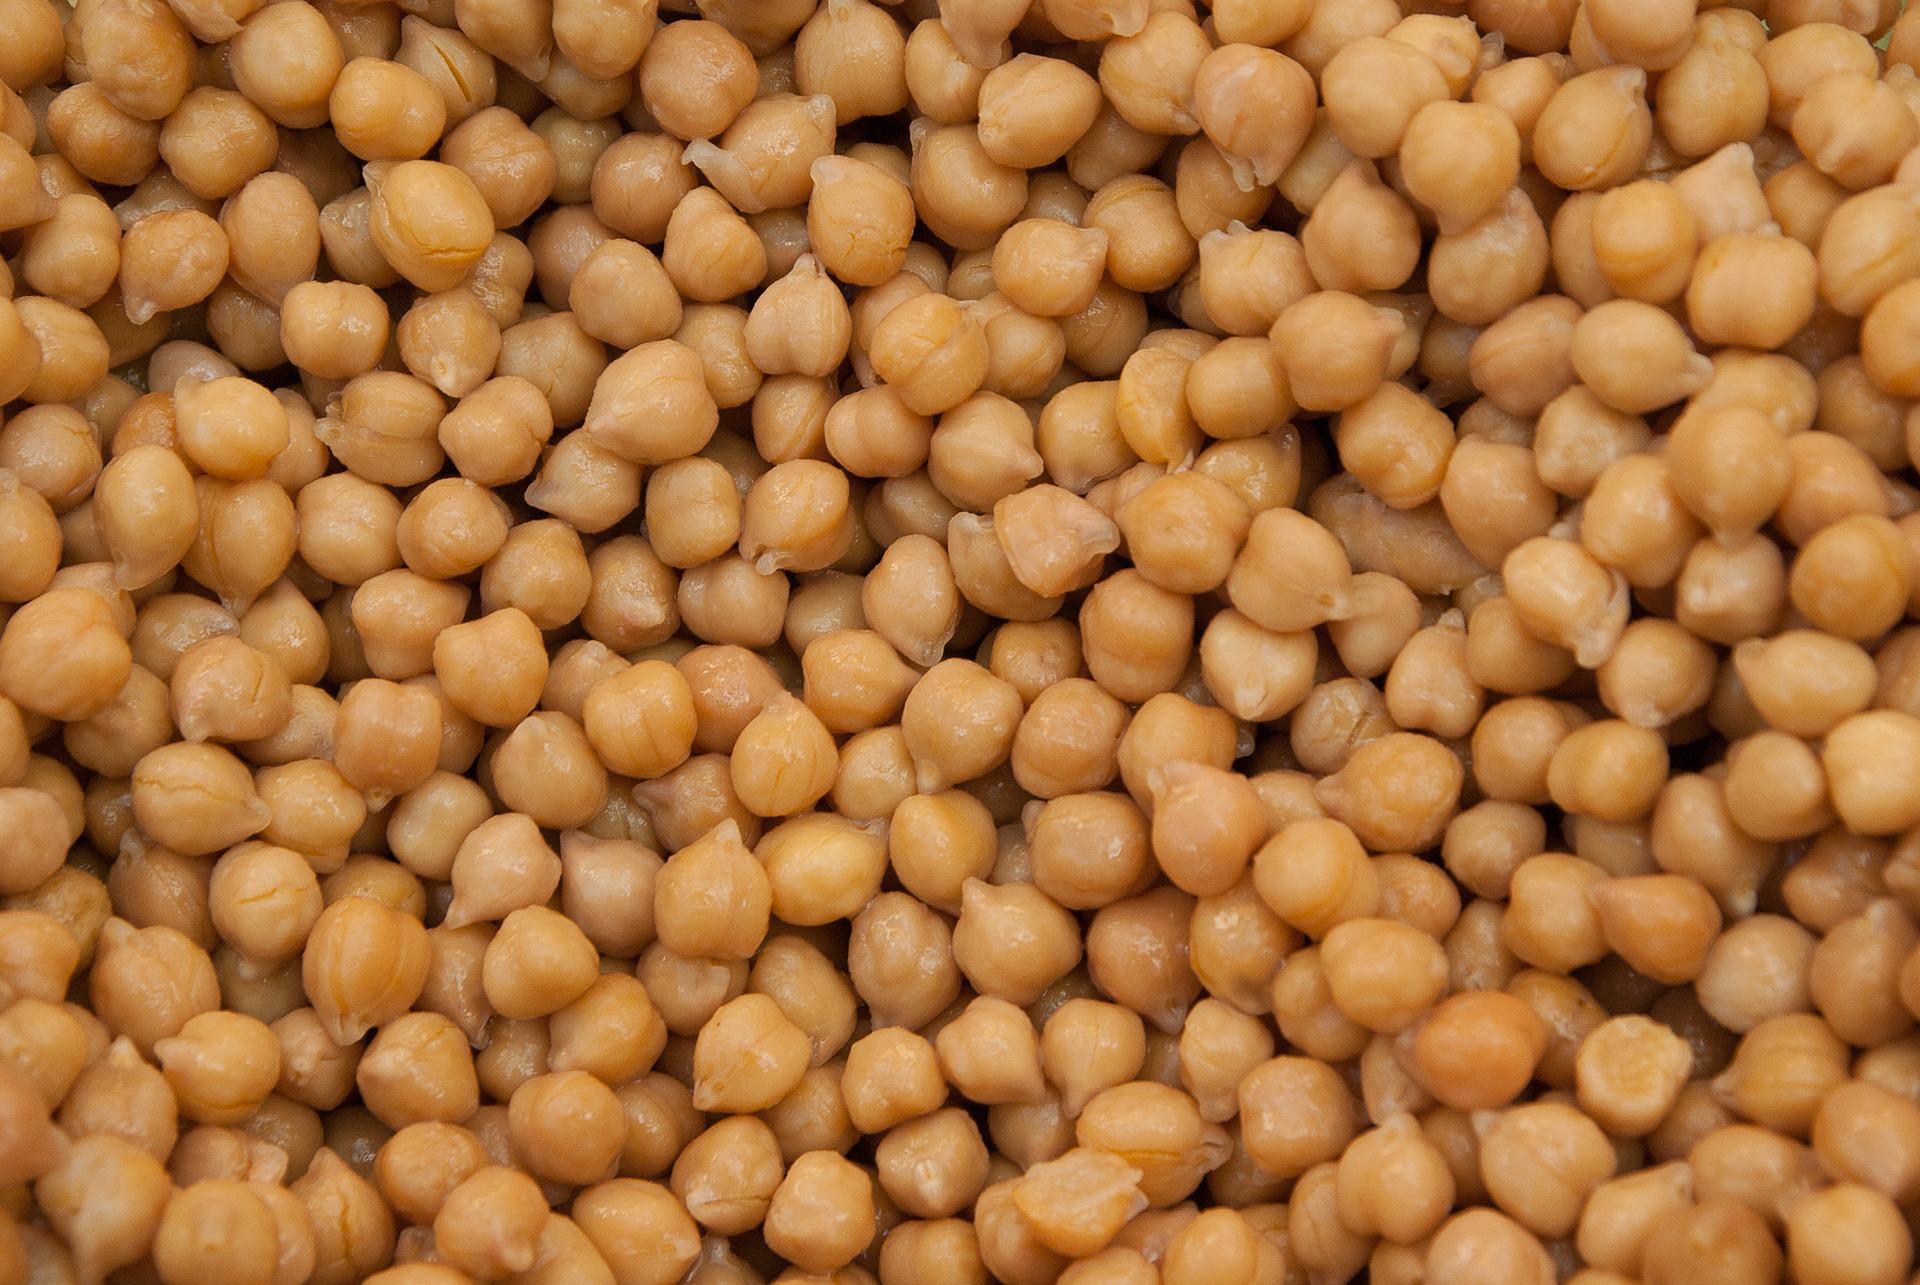 Chickpea Farming: How to Plant, and Grow